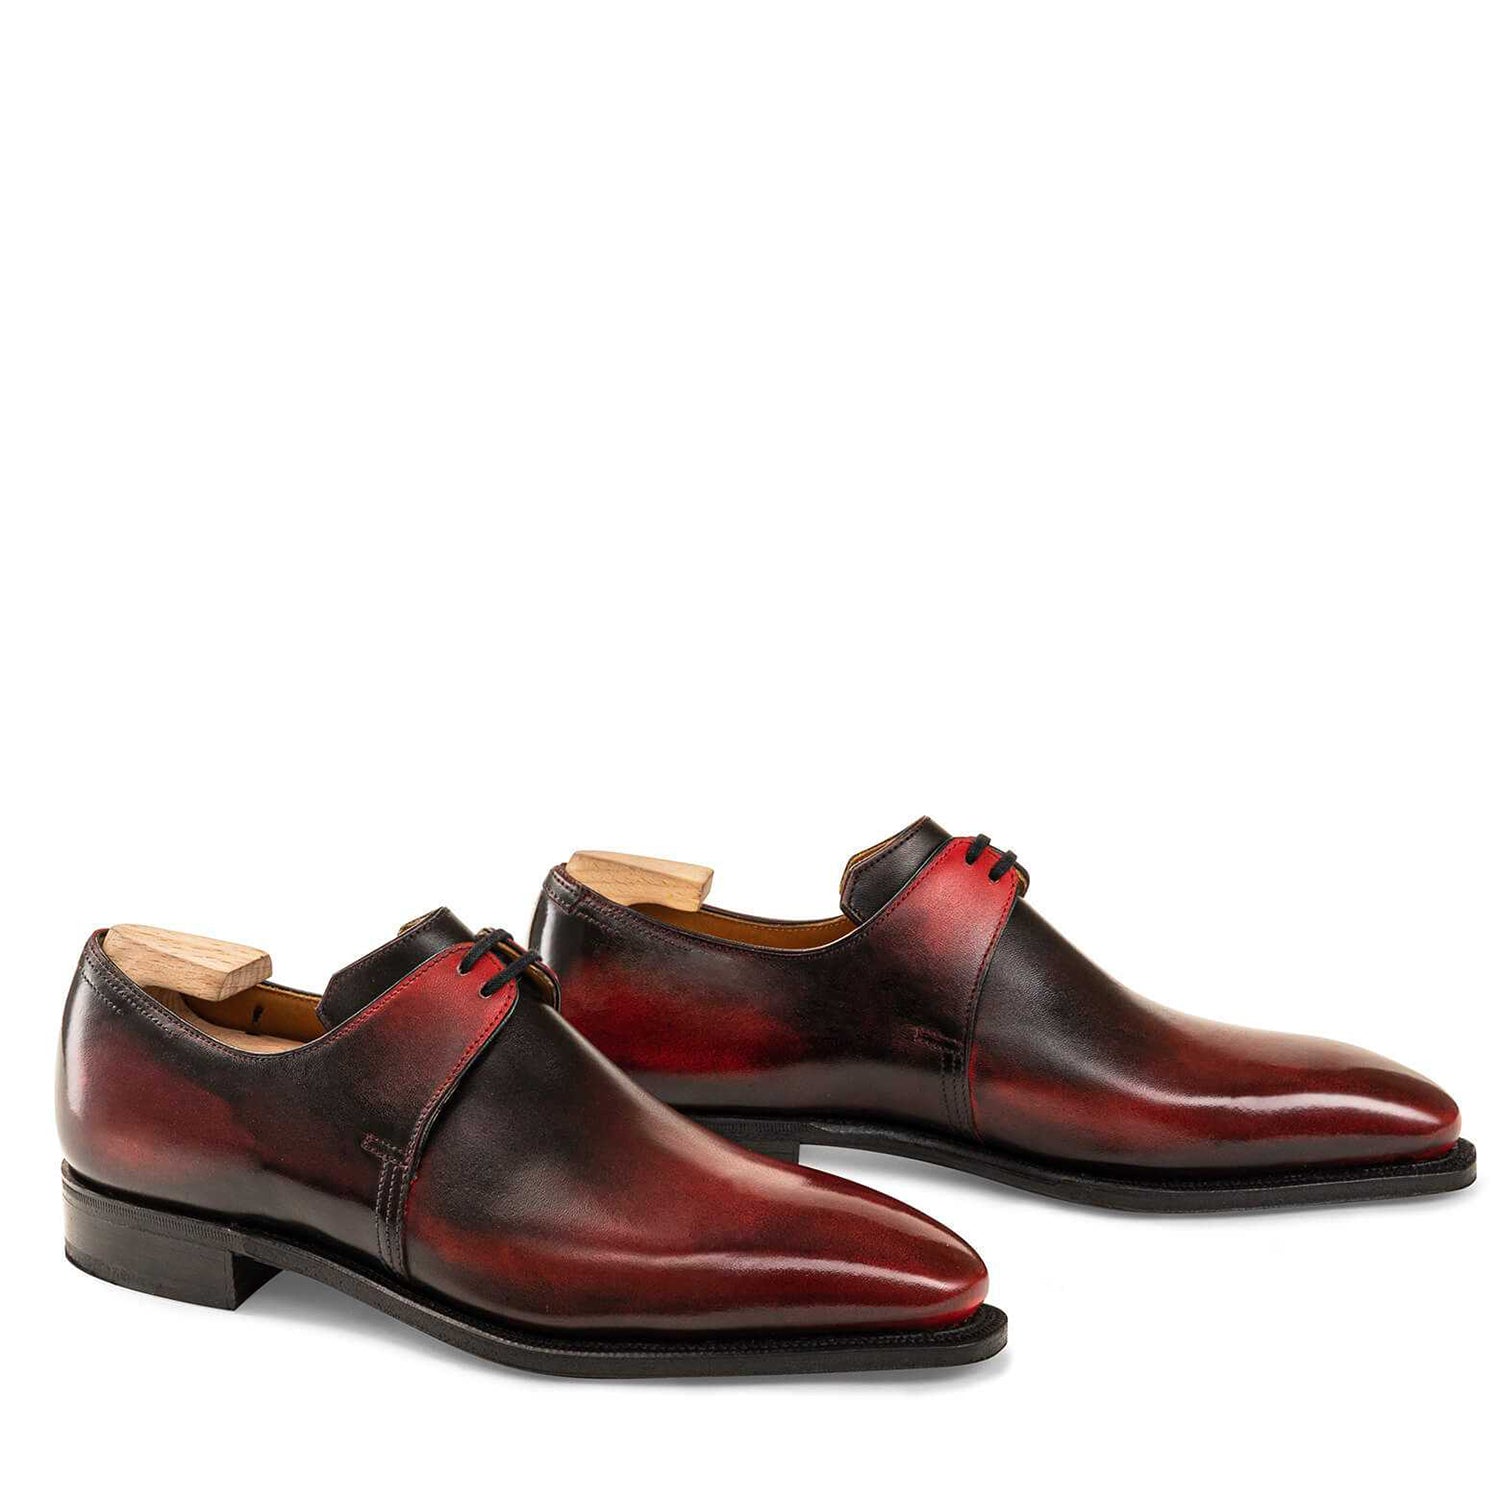 Dark Red Calf Leather Shoes